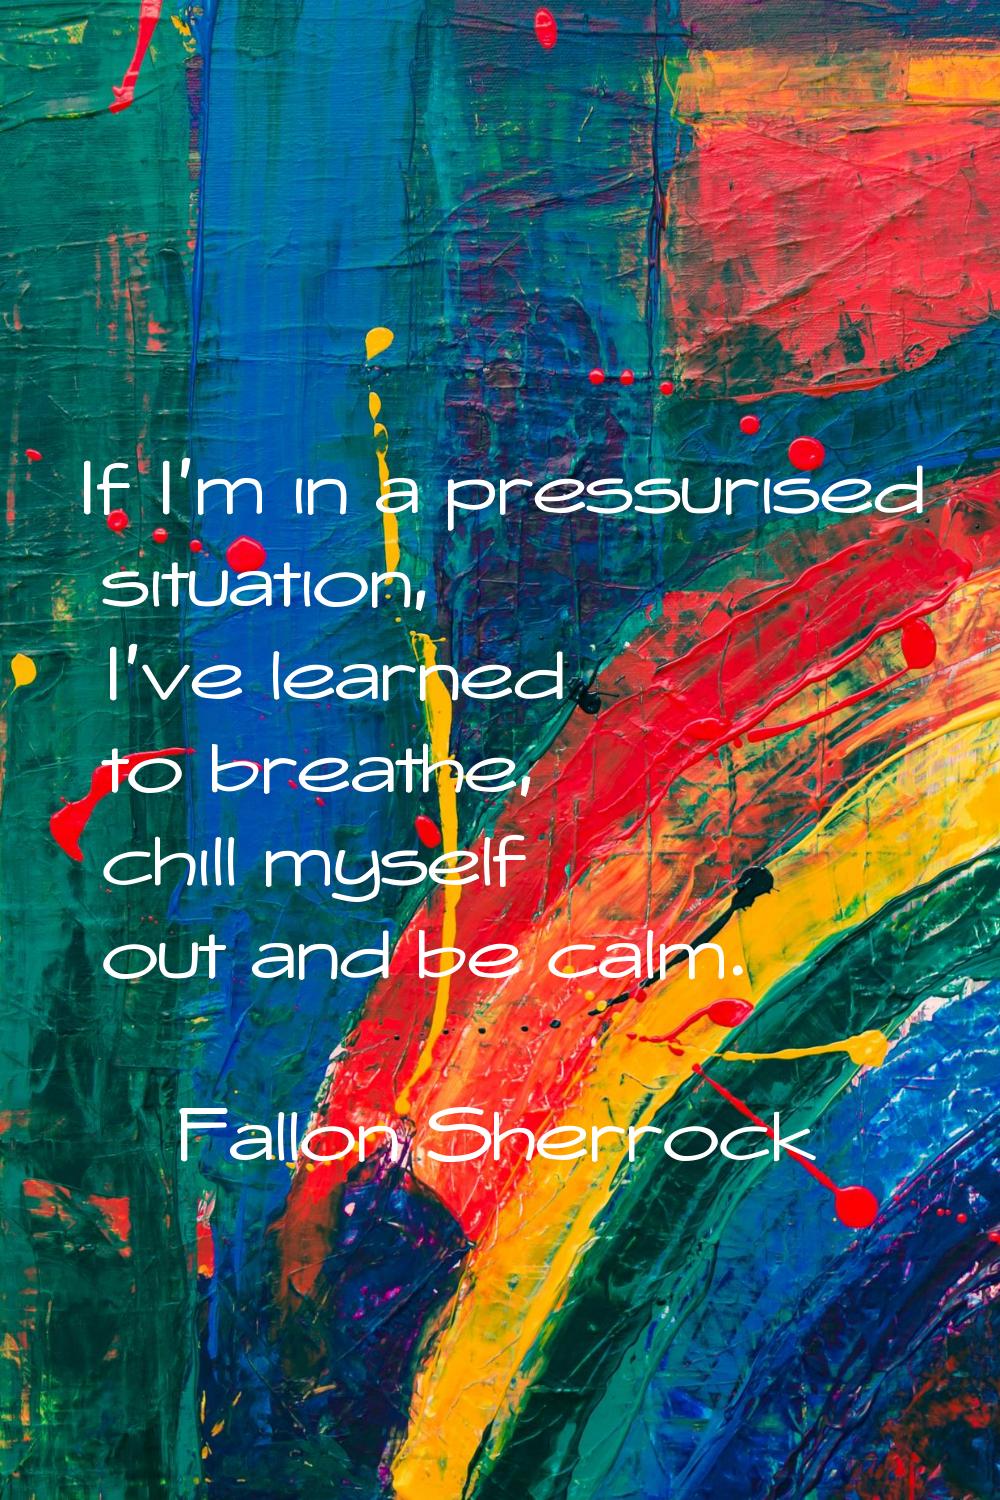 If I'm in a pressurised situation, I've learned to breathe, chill myself out and be calm.